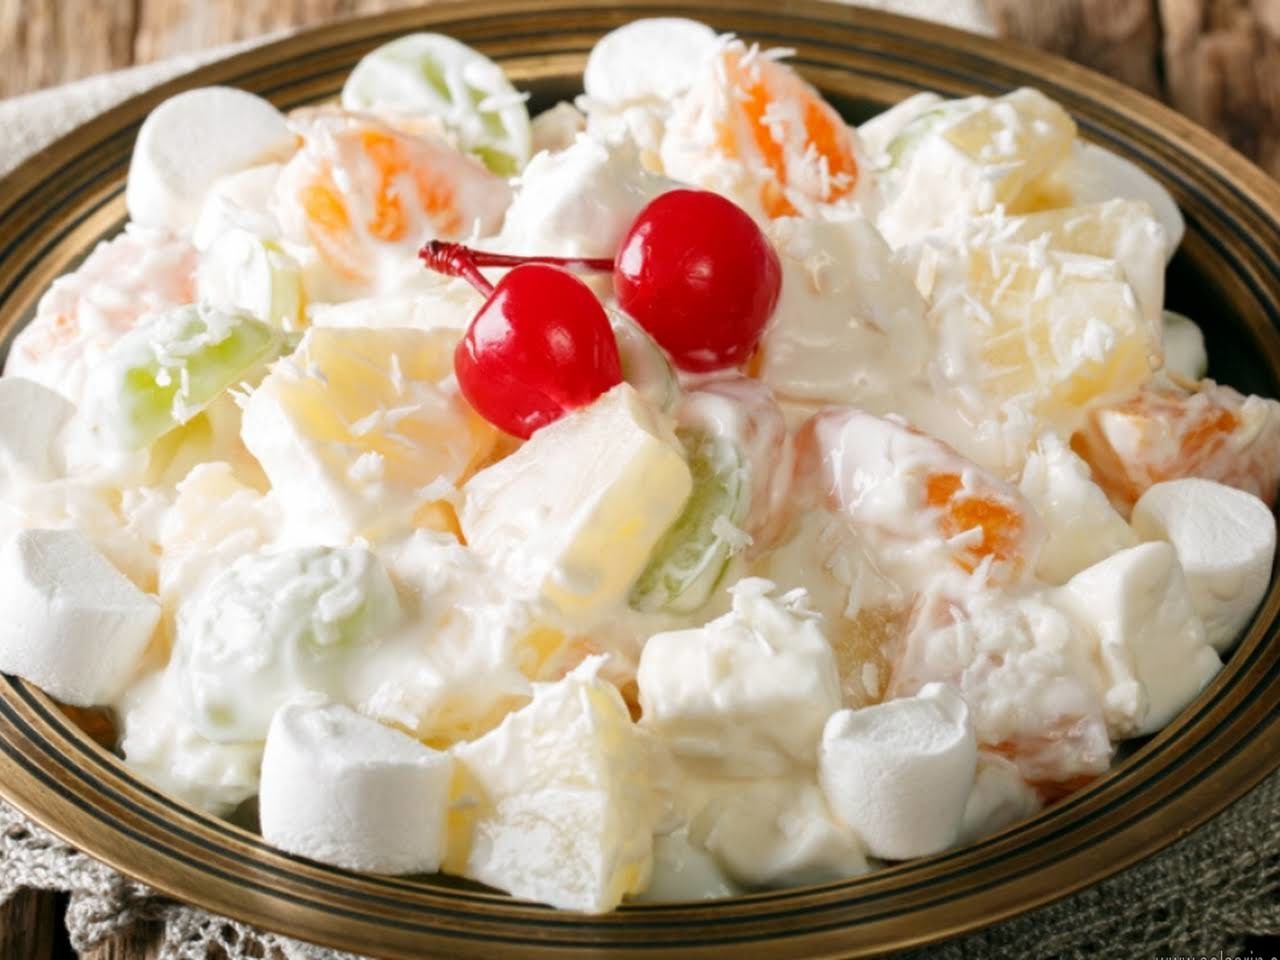 ambrosia salad recipe with cool whip